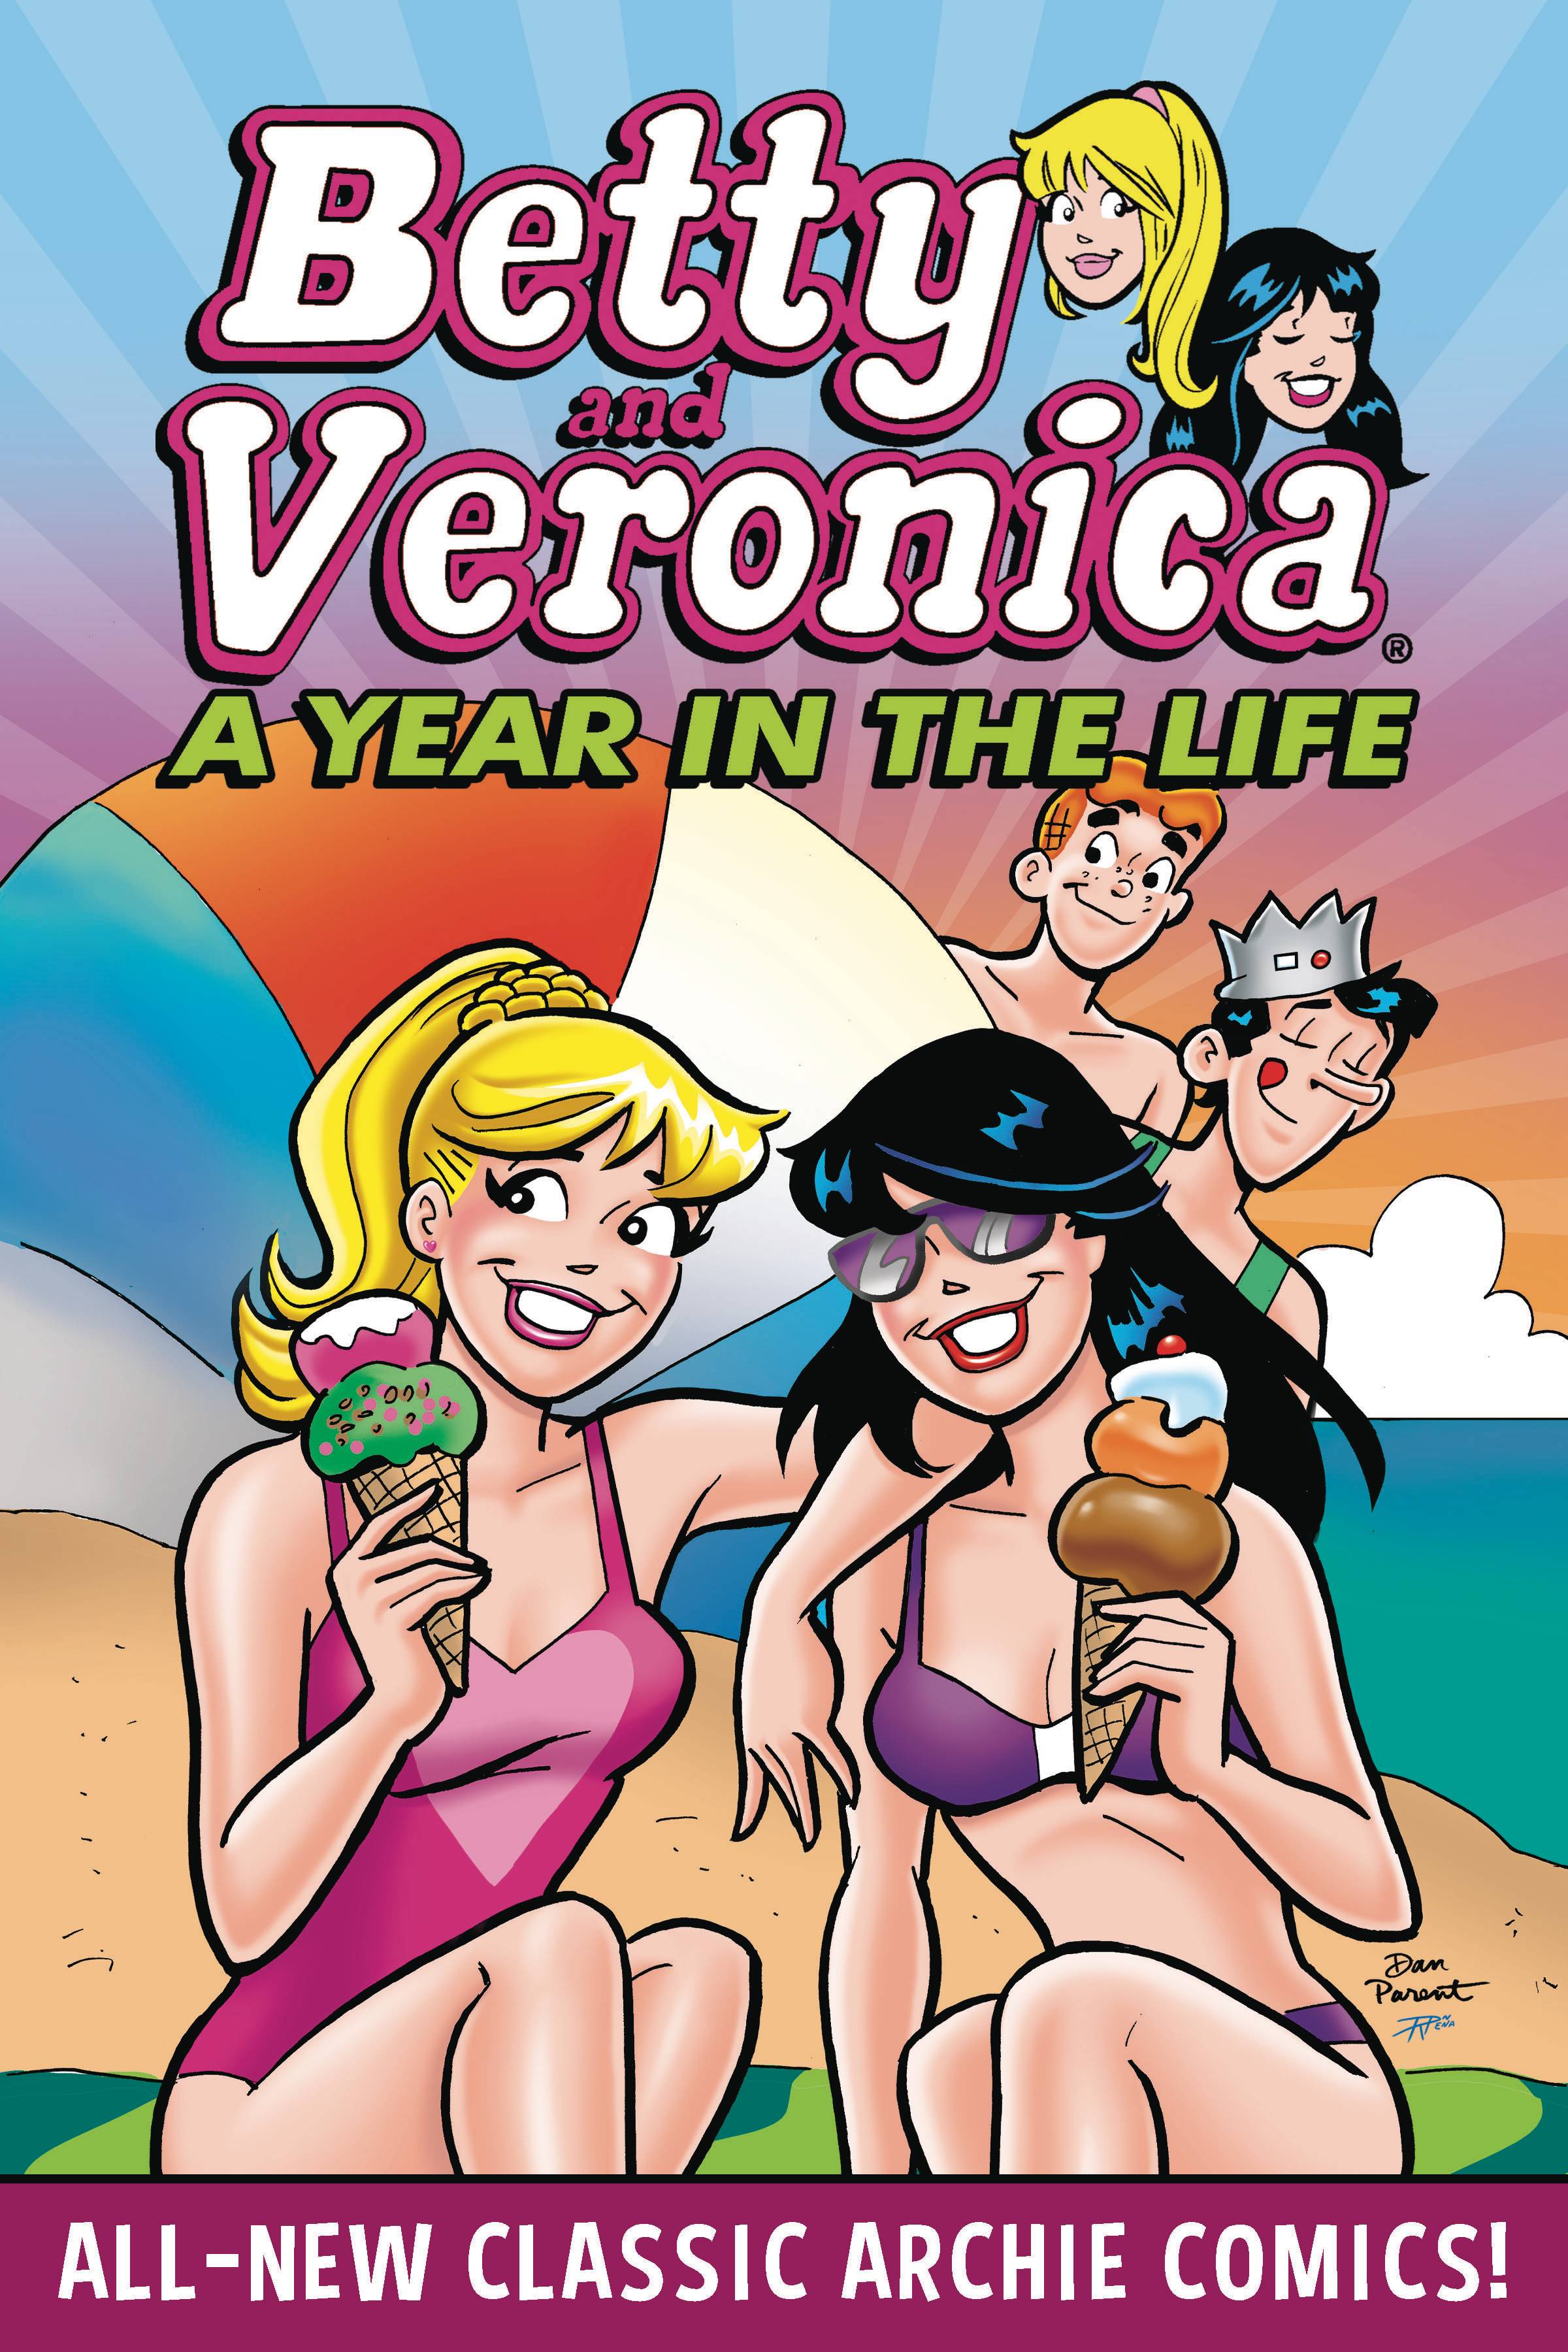 BETTY & VERONICA A YEAR IN THE LIFE TP